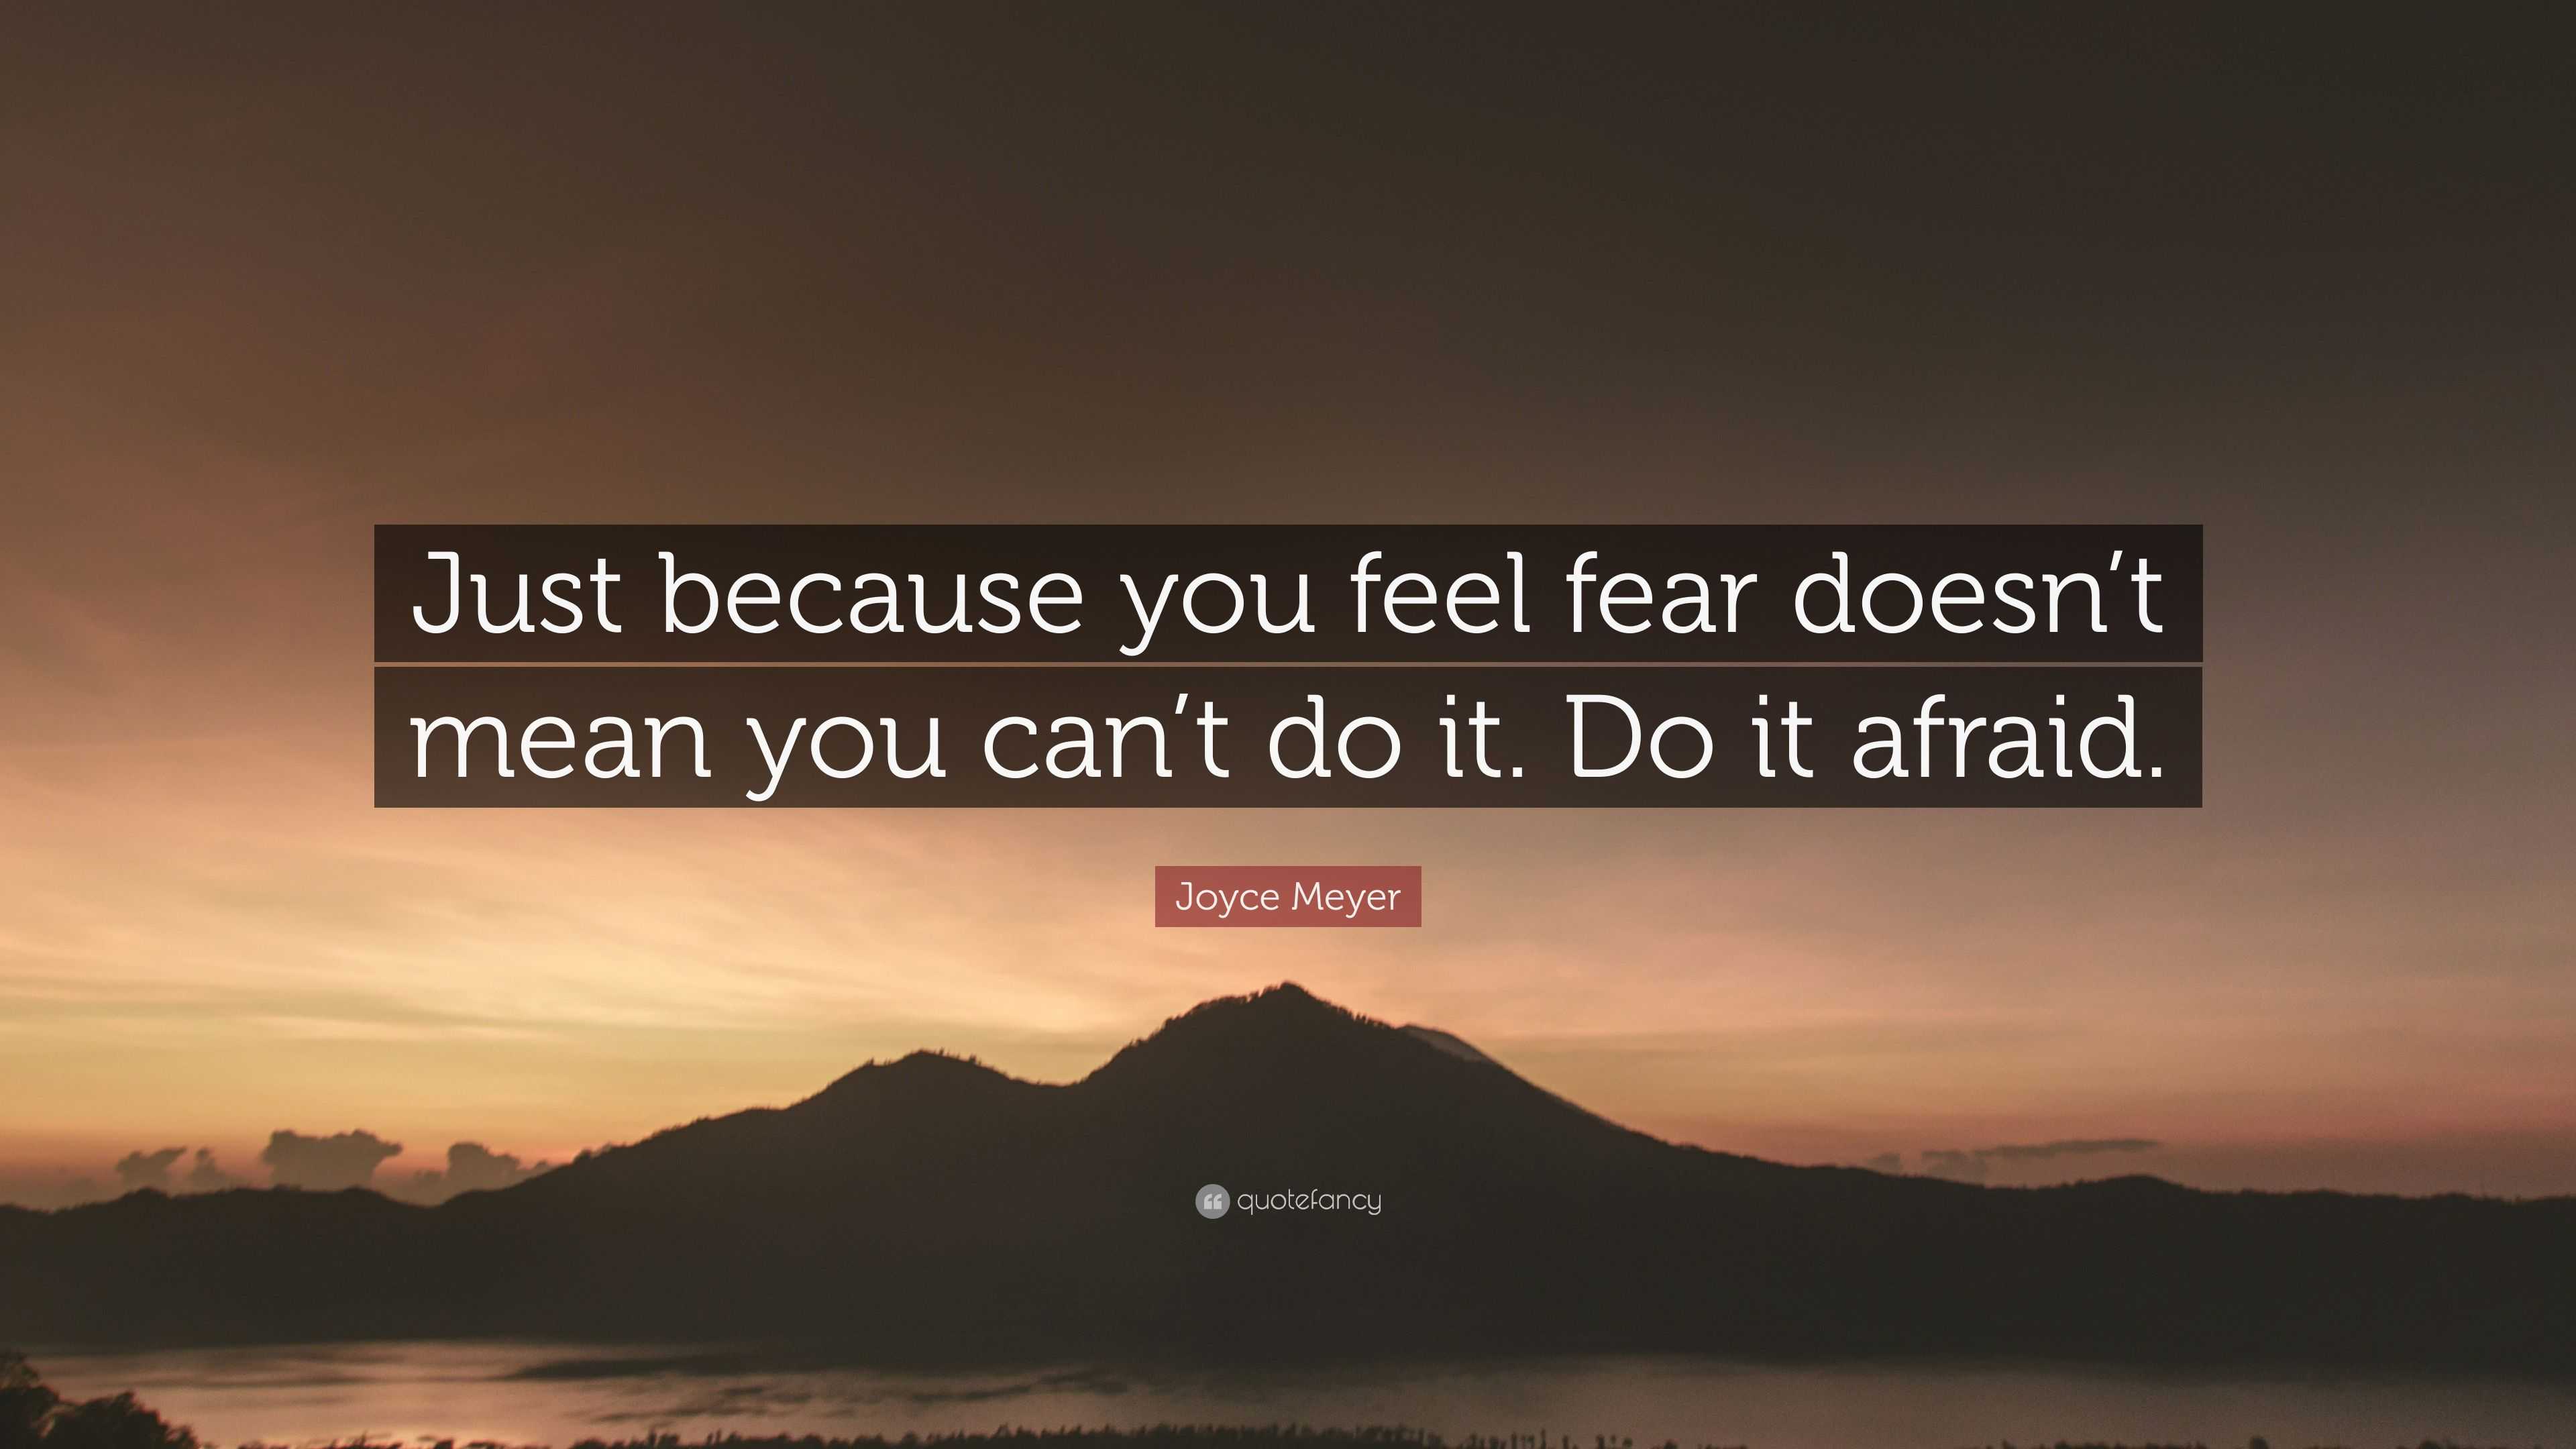 2034533 Joyce Meyer Quote Just because you feel fear doesn t mean you can